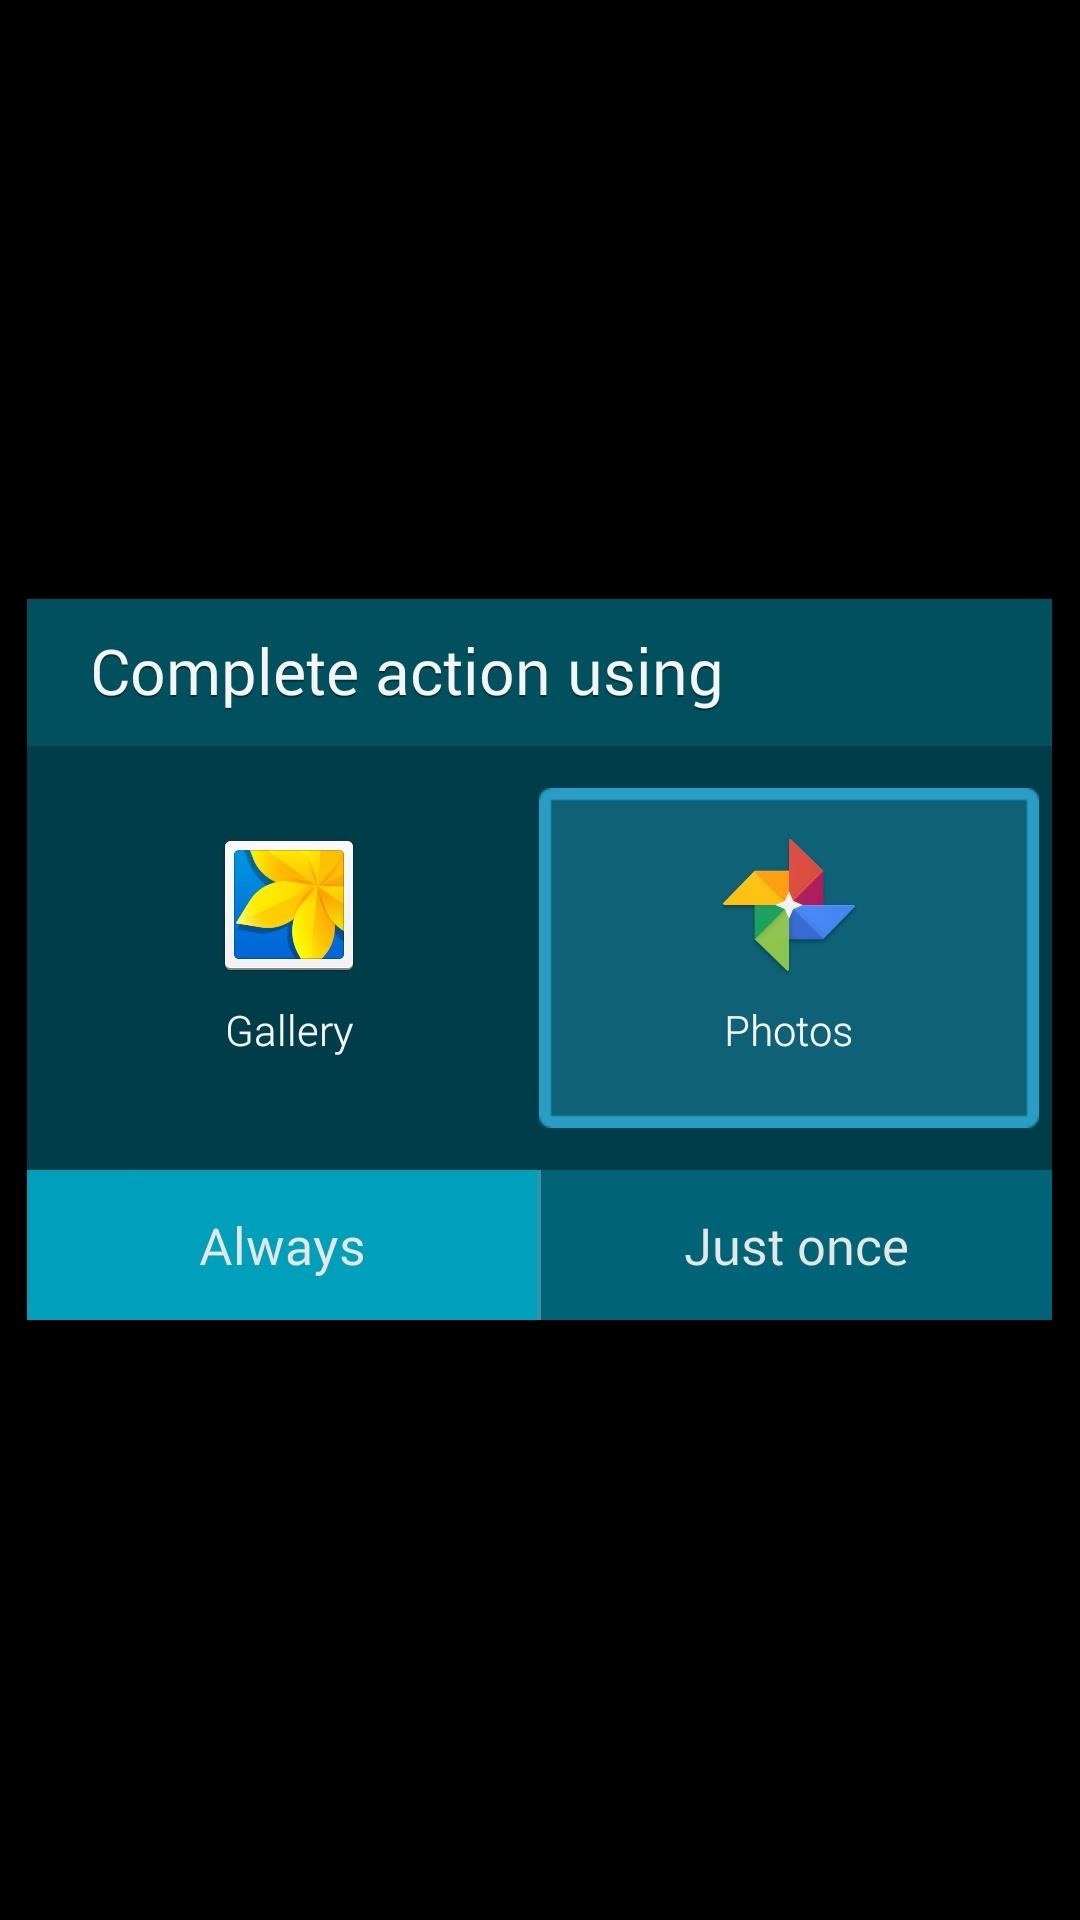 How to Use Any Gallery App as the Camera Roll on Your Samsung Galaxy Device